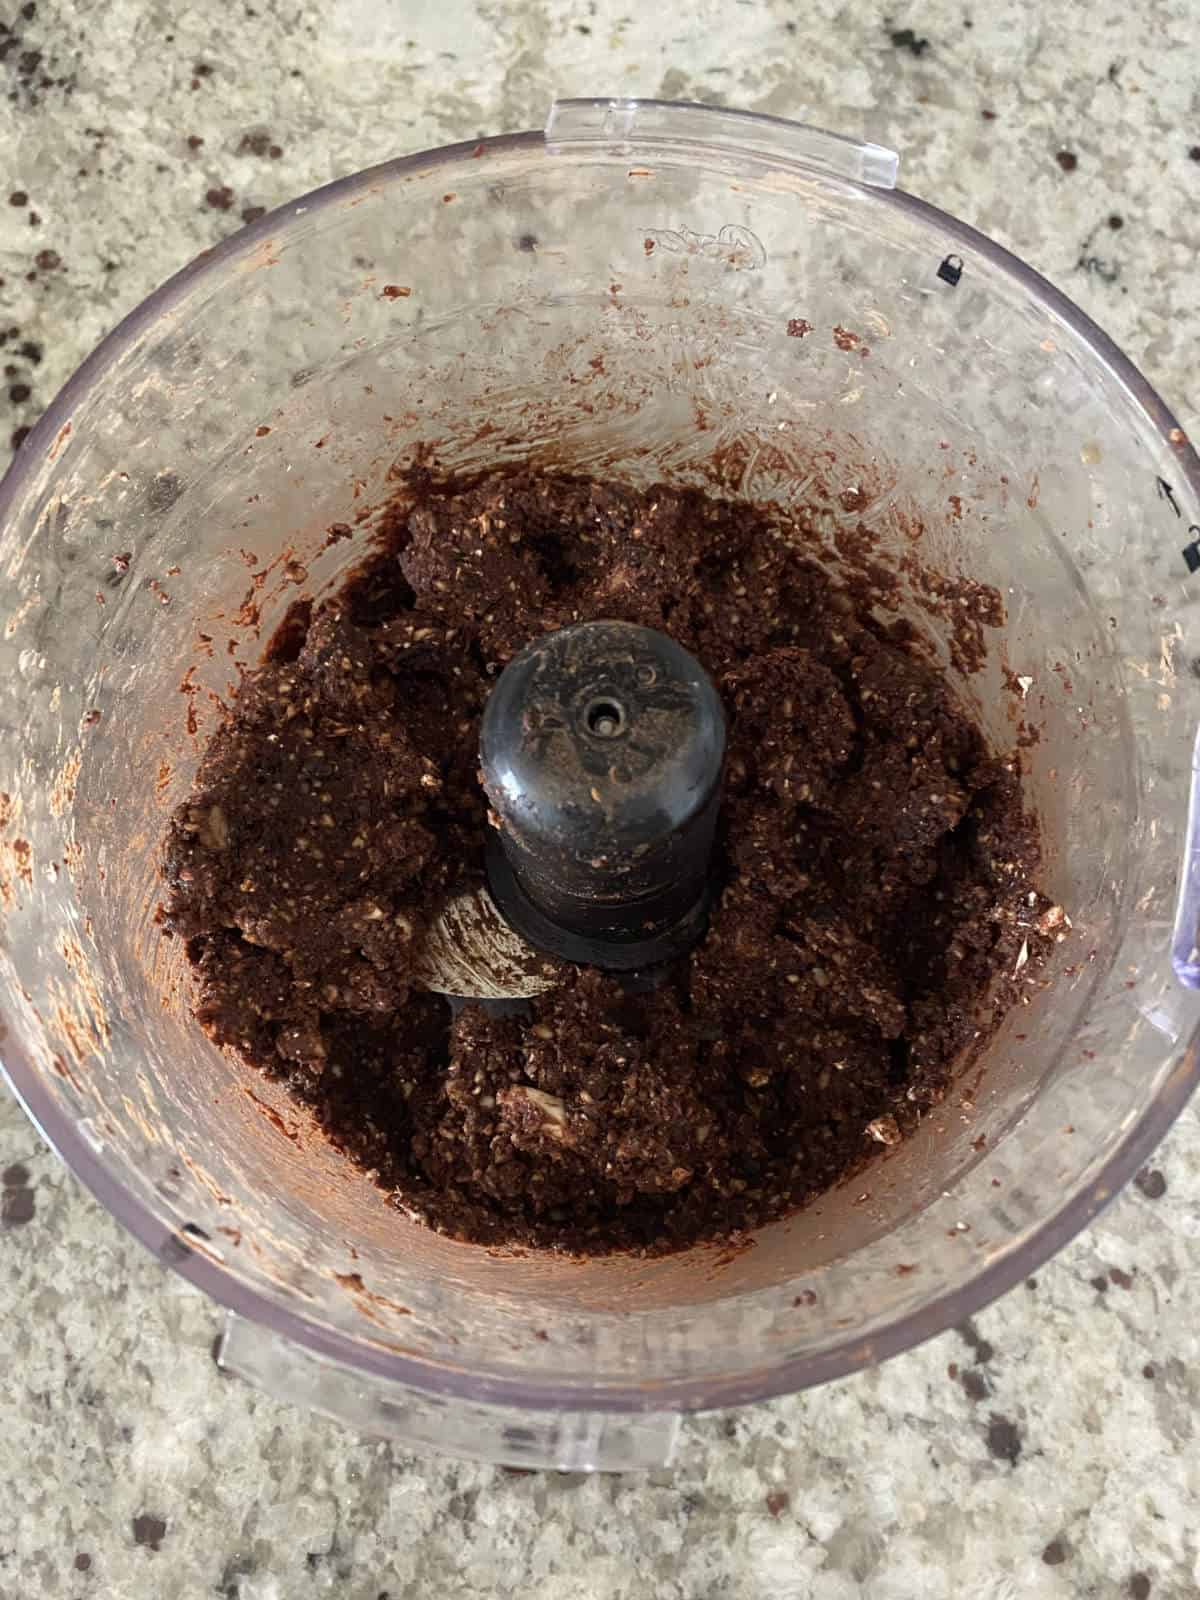 blended ingredients for the base of the healthy chocolate snack